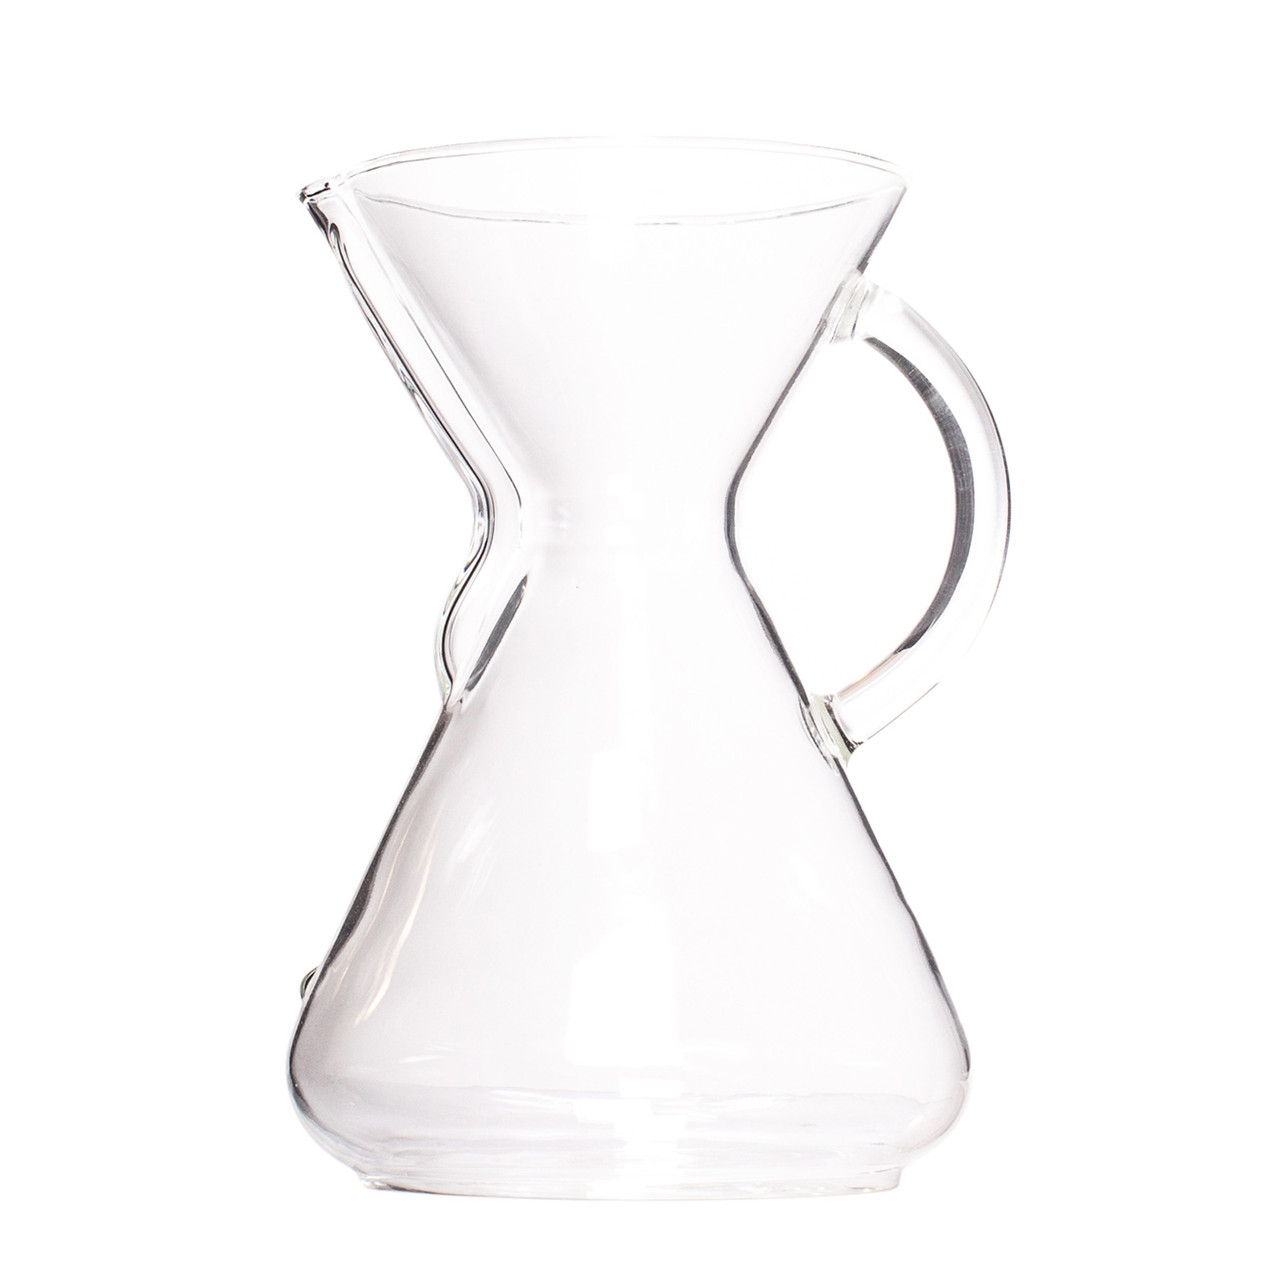 https://cdn11.bigcommerce.com/s-6h7ychjk4/images/stencil/1280x1280/products/7439/87295/chemex-10-cup-glass-handle-copy__85326.1597176097.jpg?c=1&imbypass=on